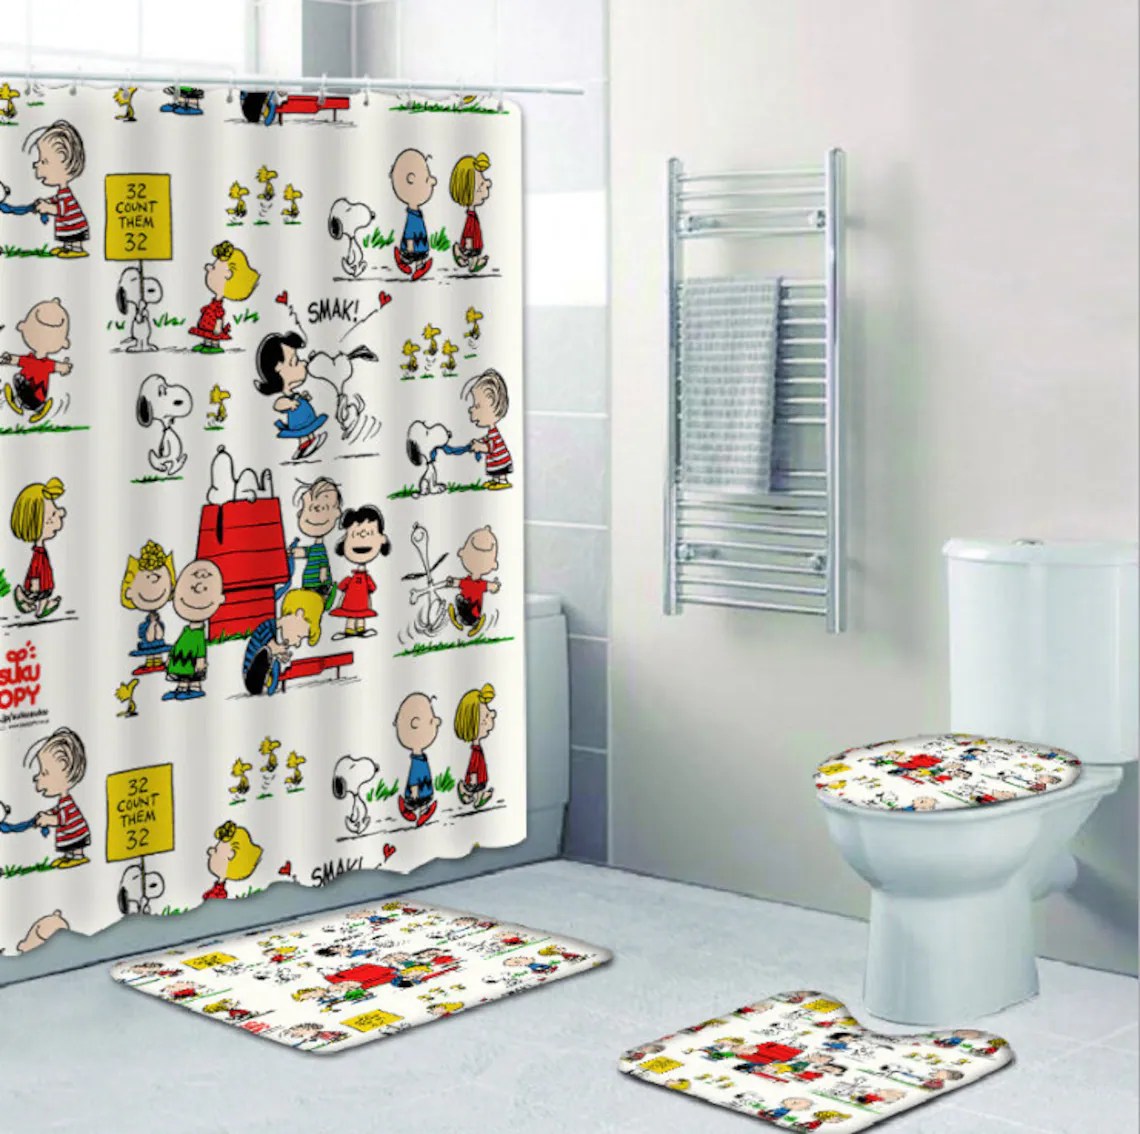 Snoopy animation shower curtain set with nonslip carpet Etsy